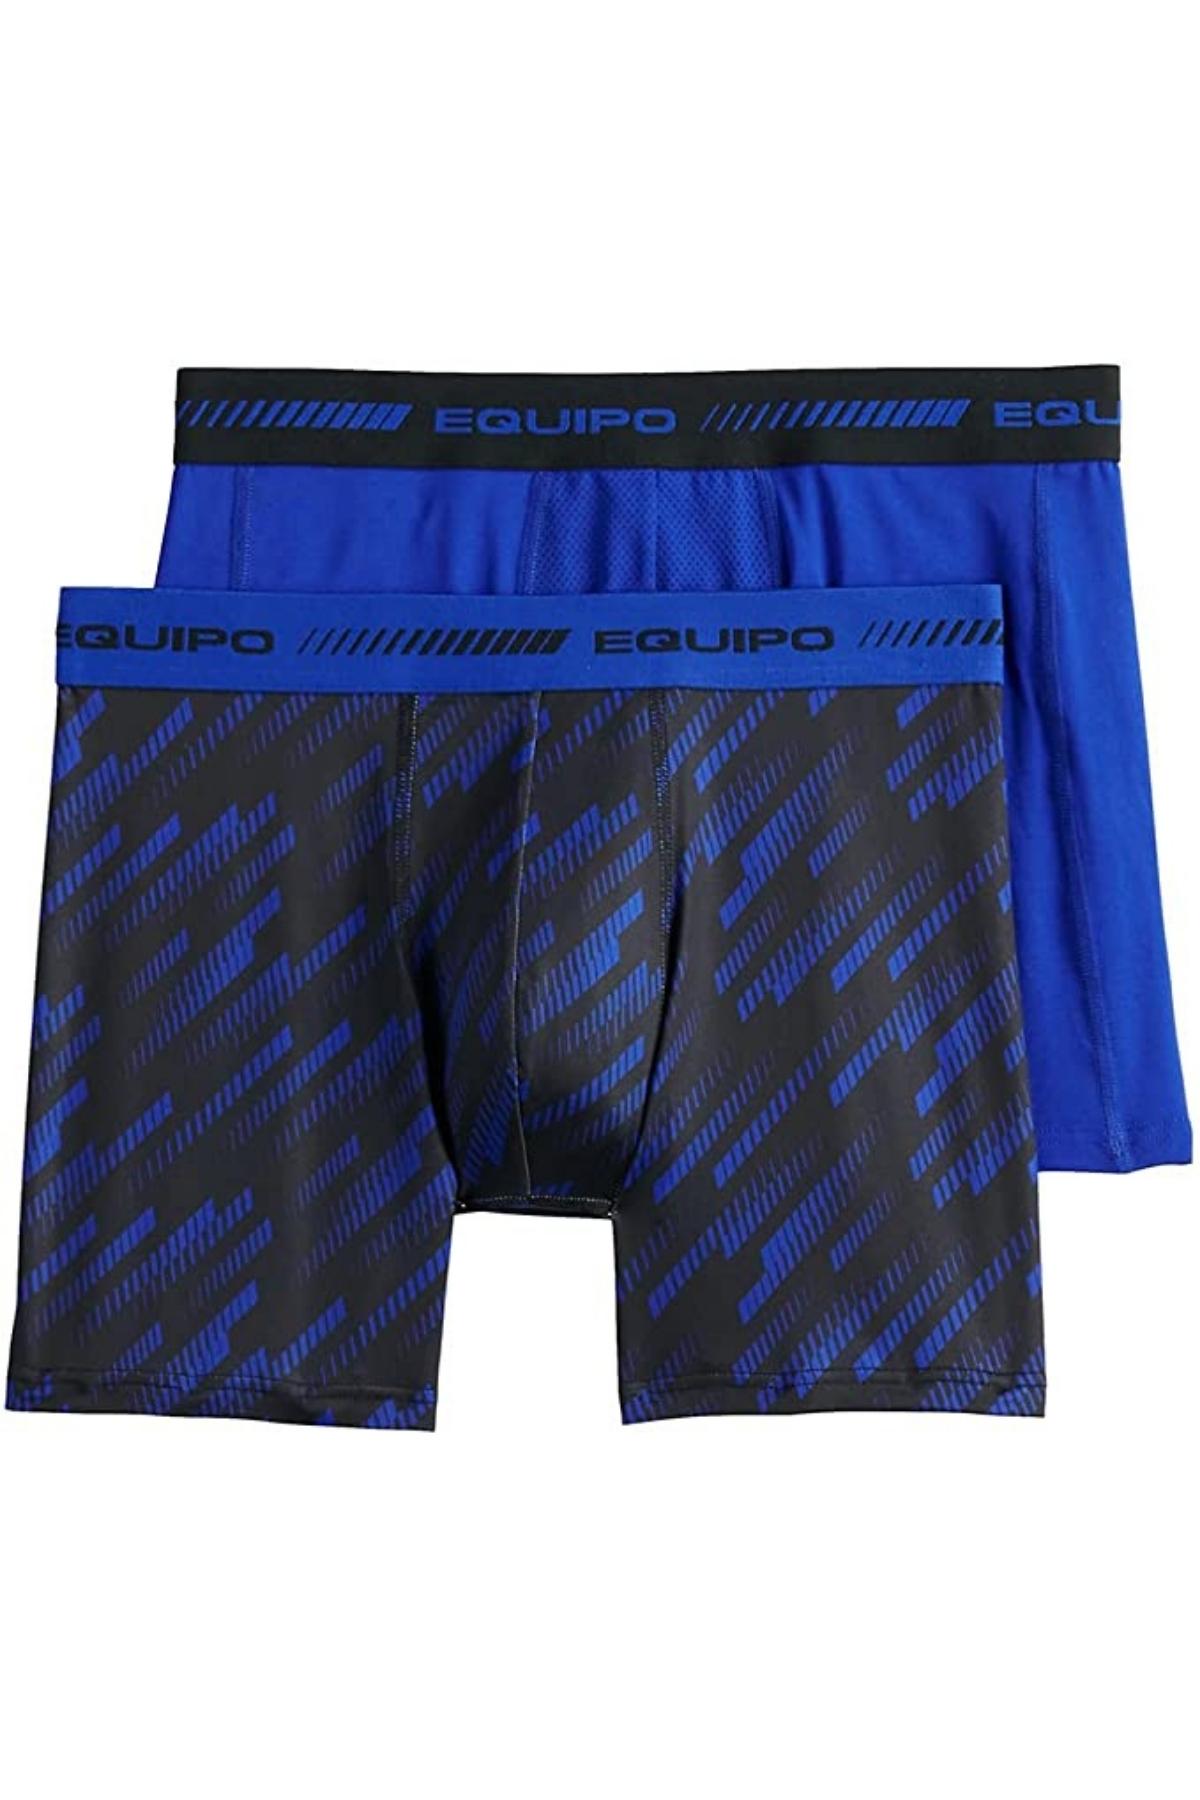 Equipo Blue and Diagonal Lines Quick Dry Performace 2-Pack Boxer Briefs